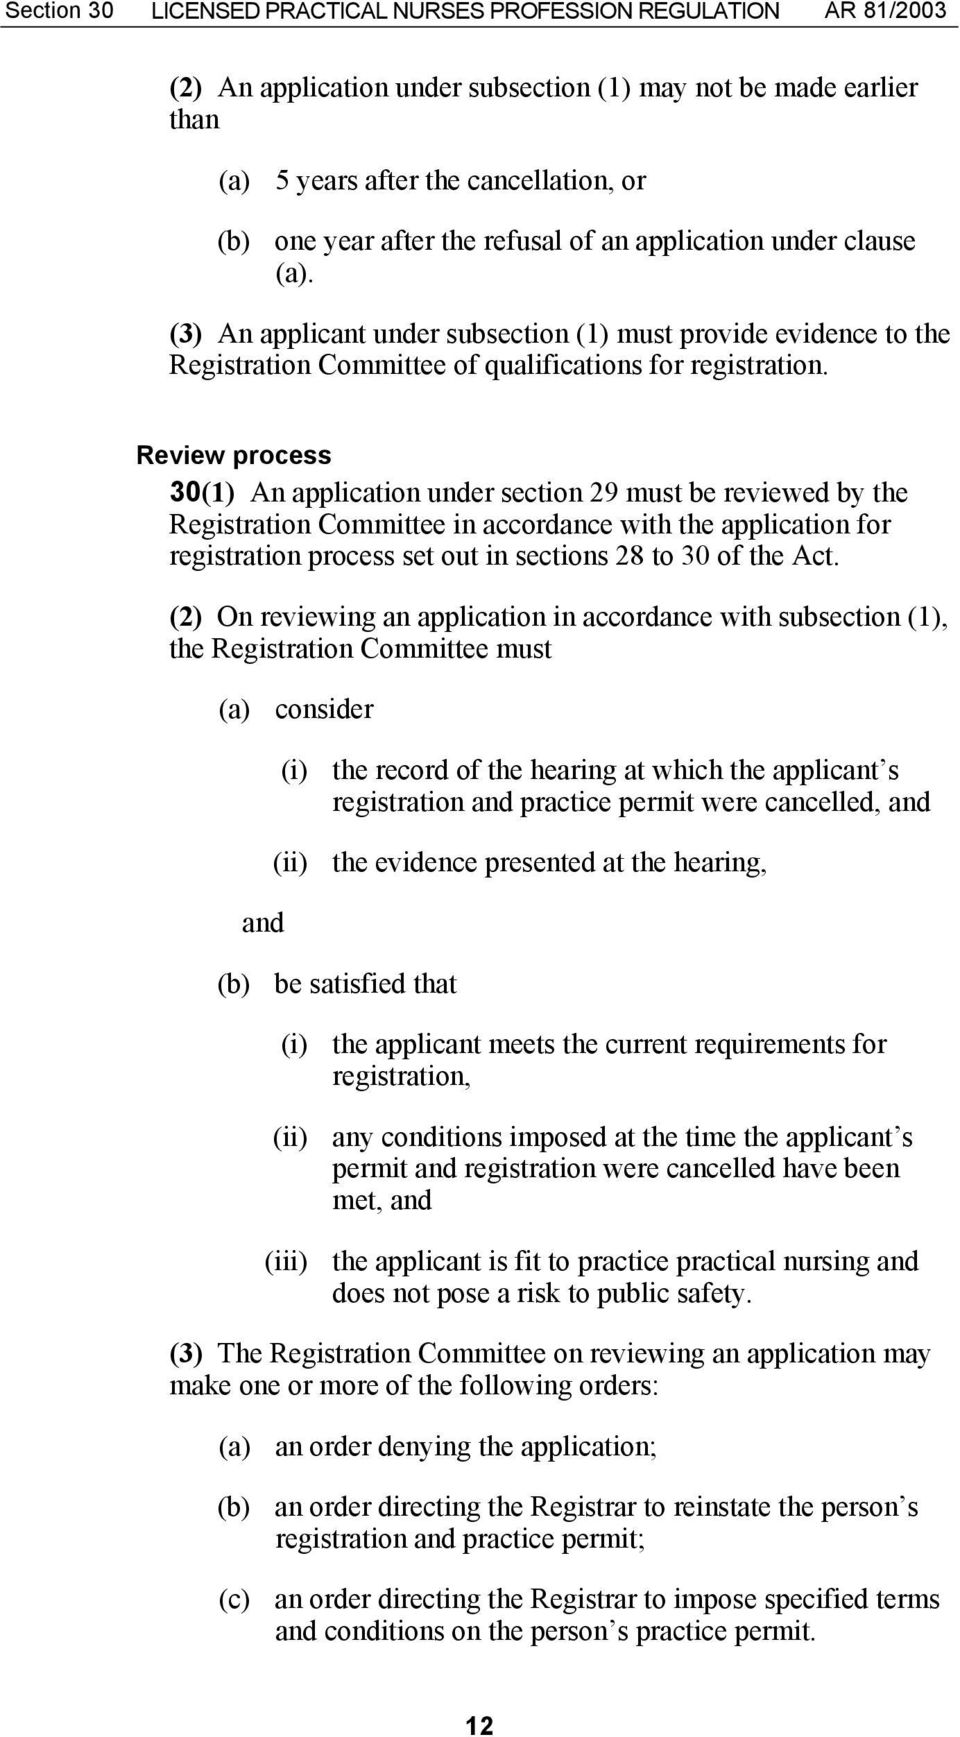 Review process 30(1) An application under section 29 must be reviewed by the Registration Committee in accordance with the application for registration process set out in sections 28 to 30 of the Act.